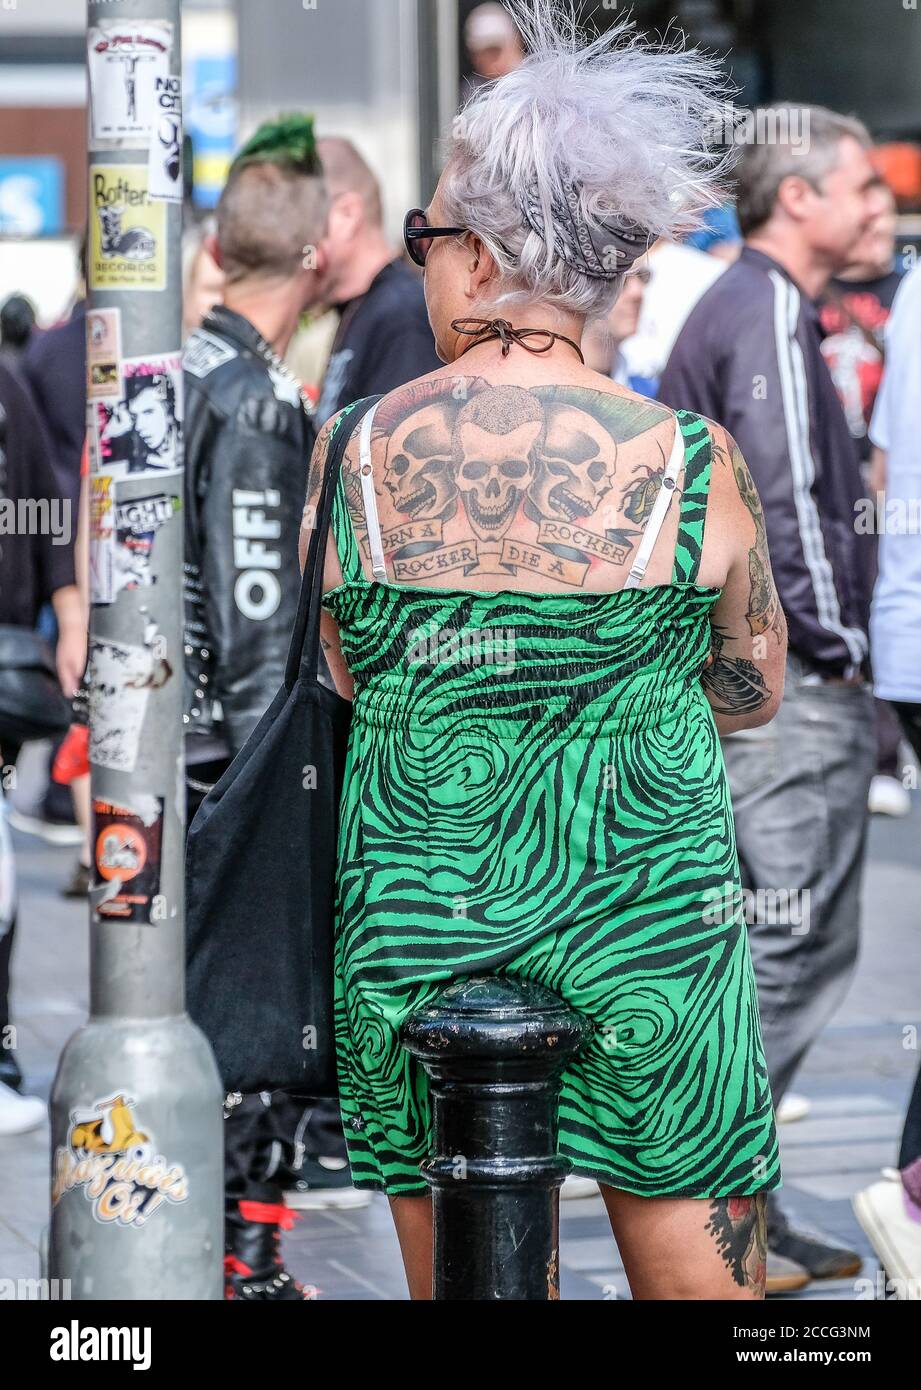 punk woman sitting on low post with bright green dress and vivid tattoos on her back 2CCG3NM